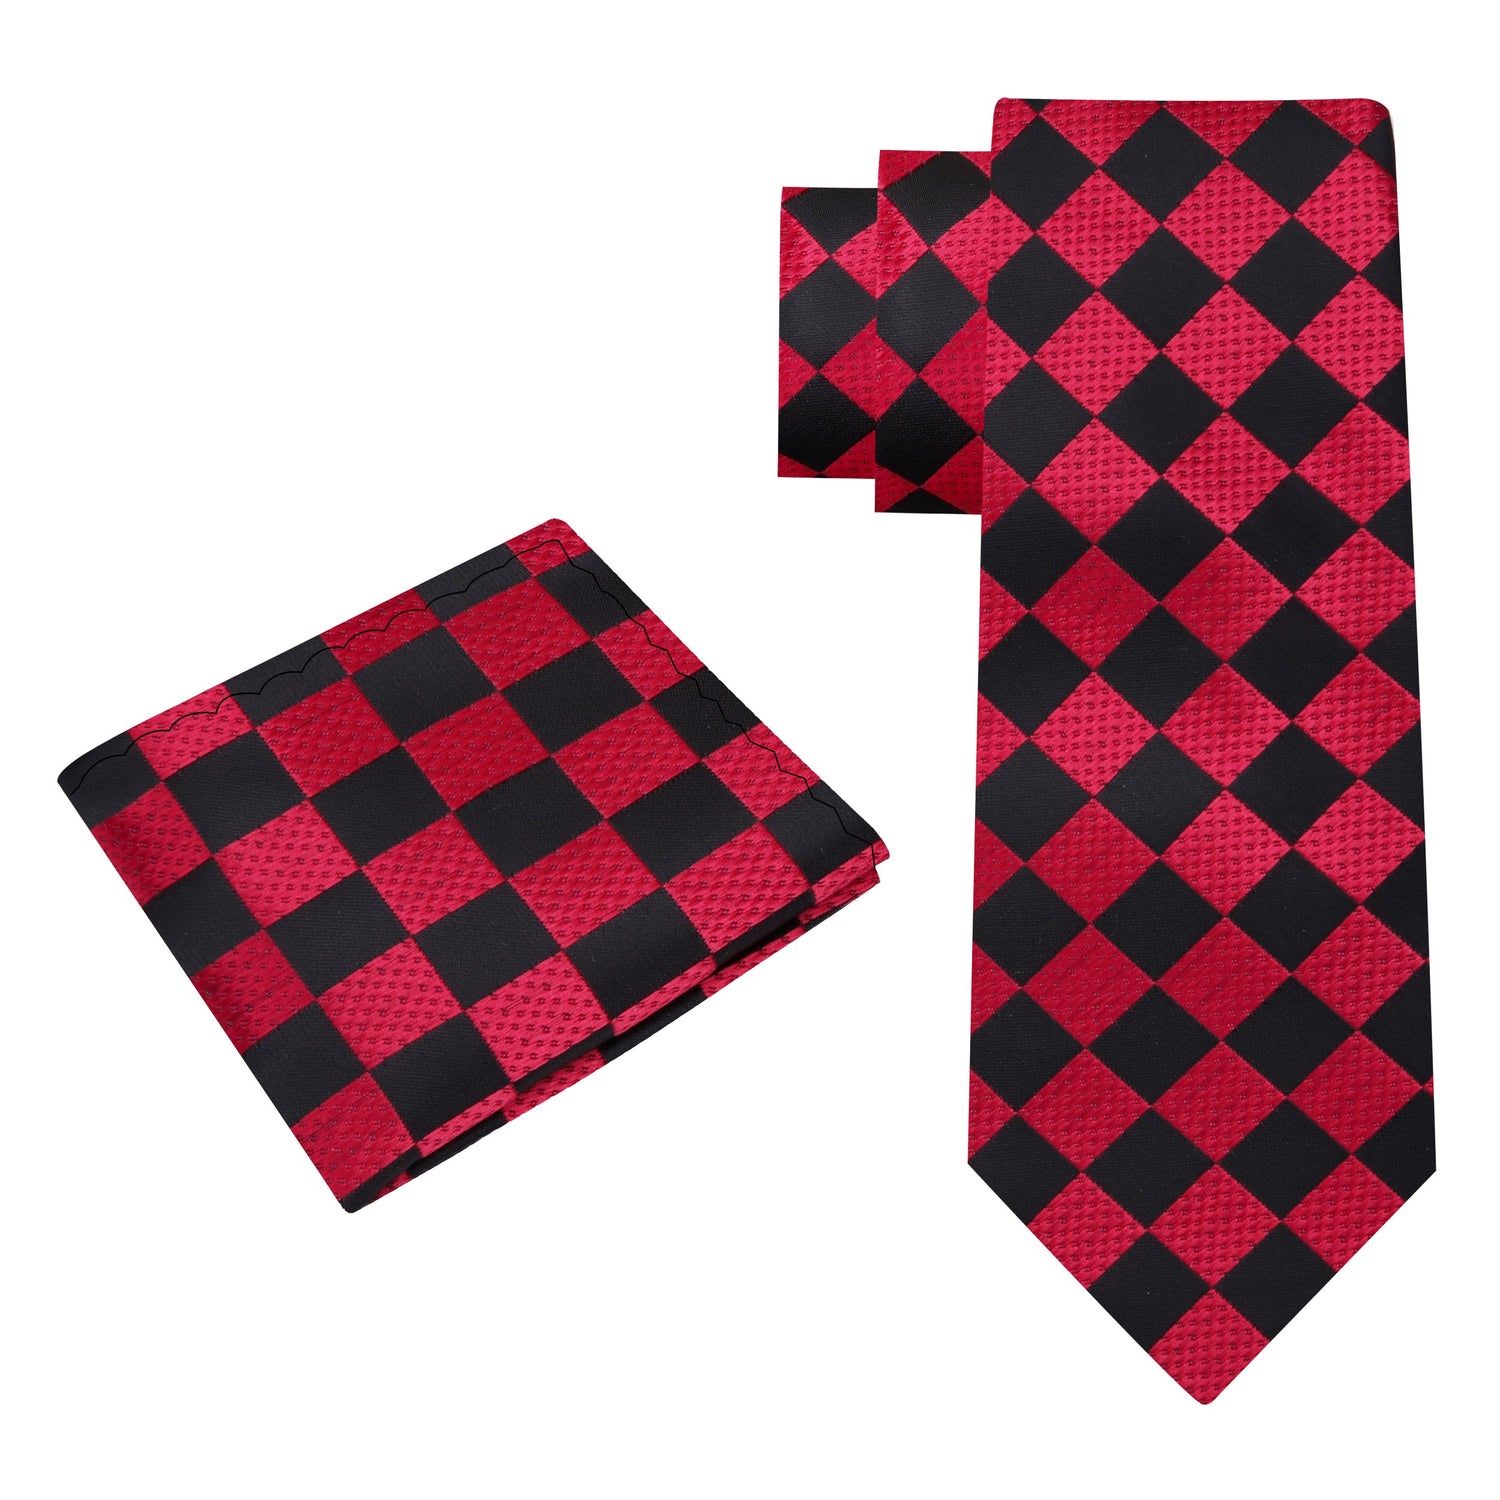 Alt View: Red, black geometric tie and pocket square